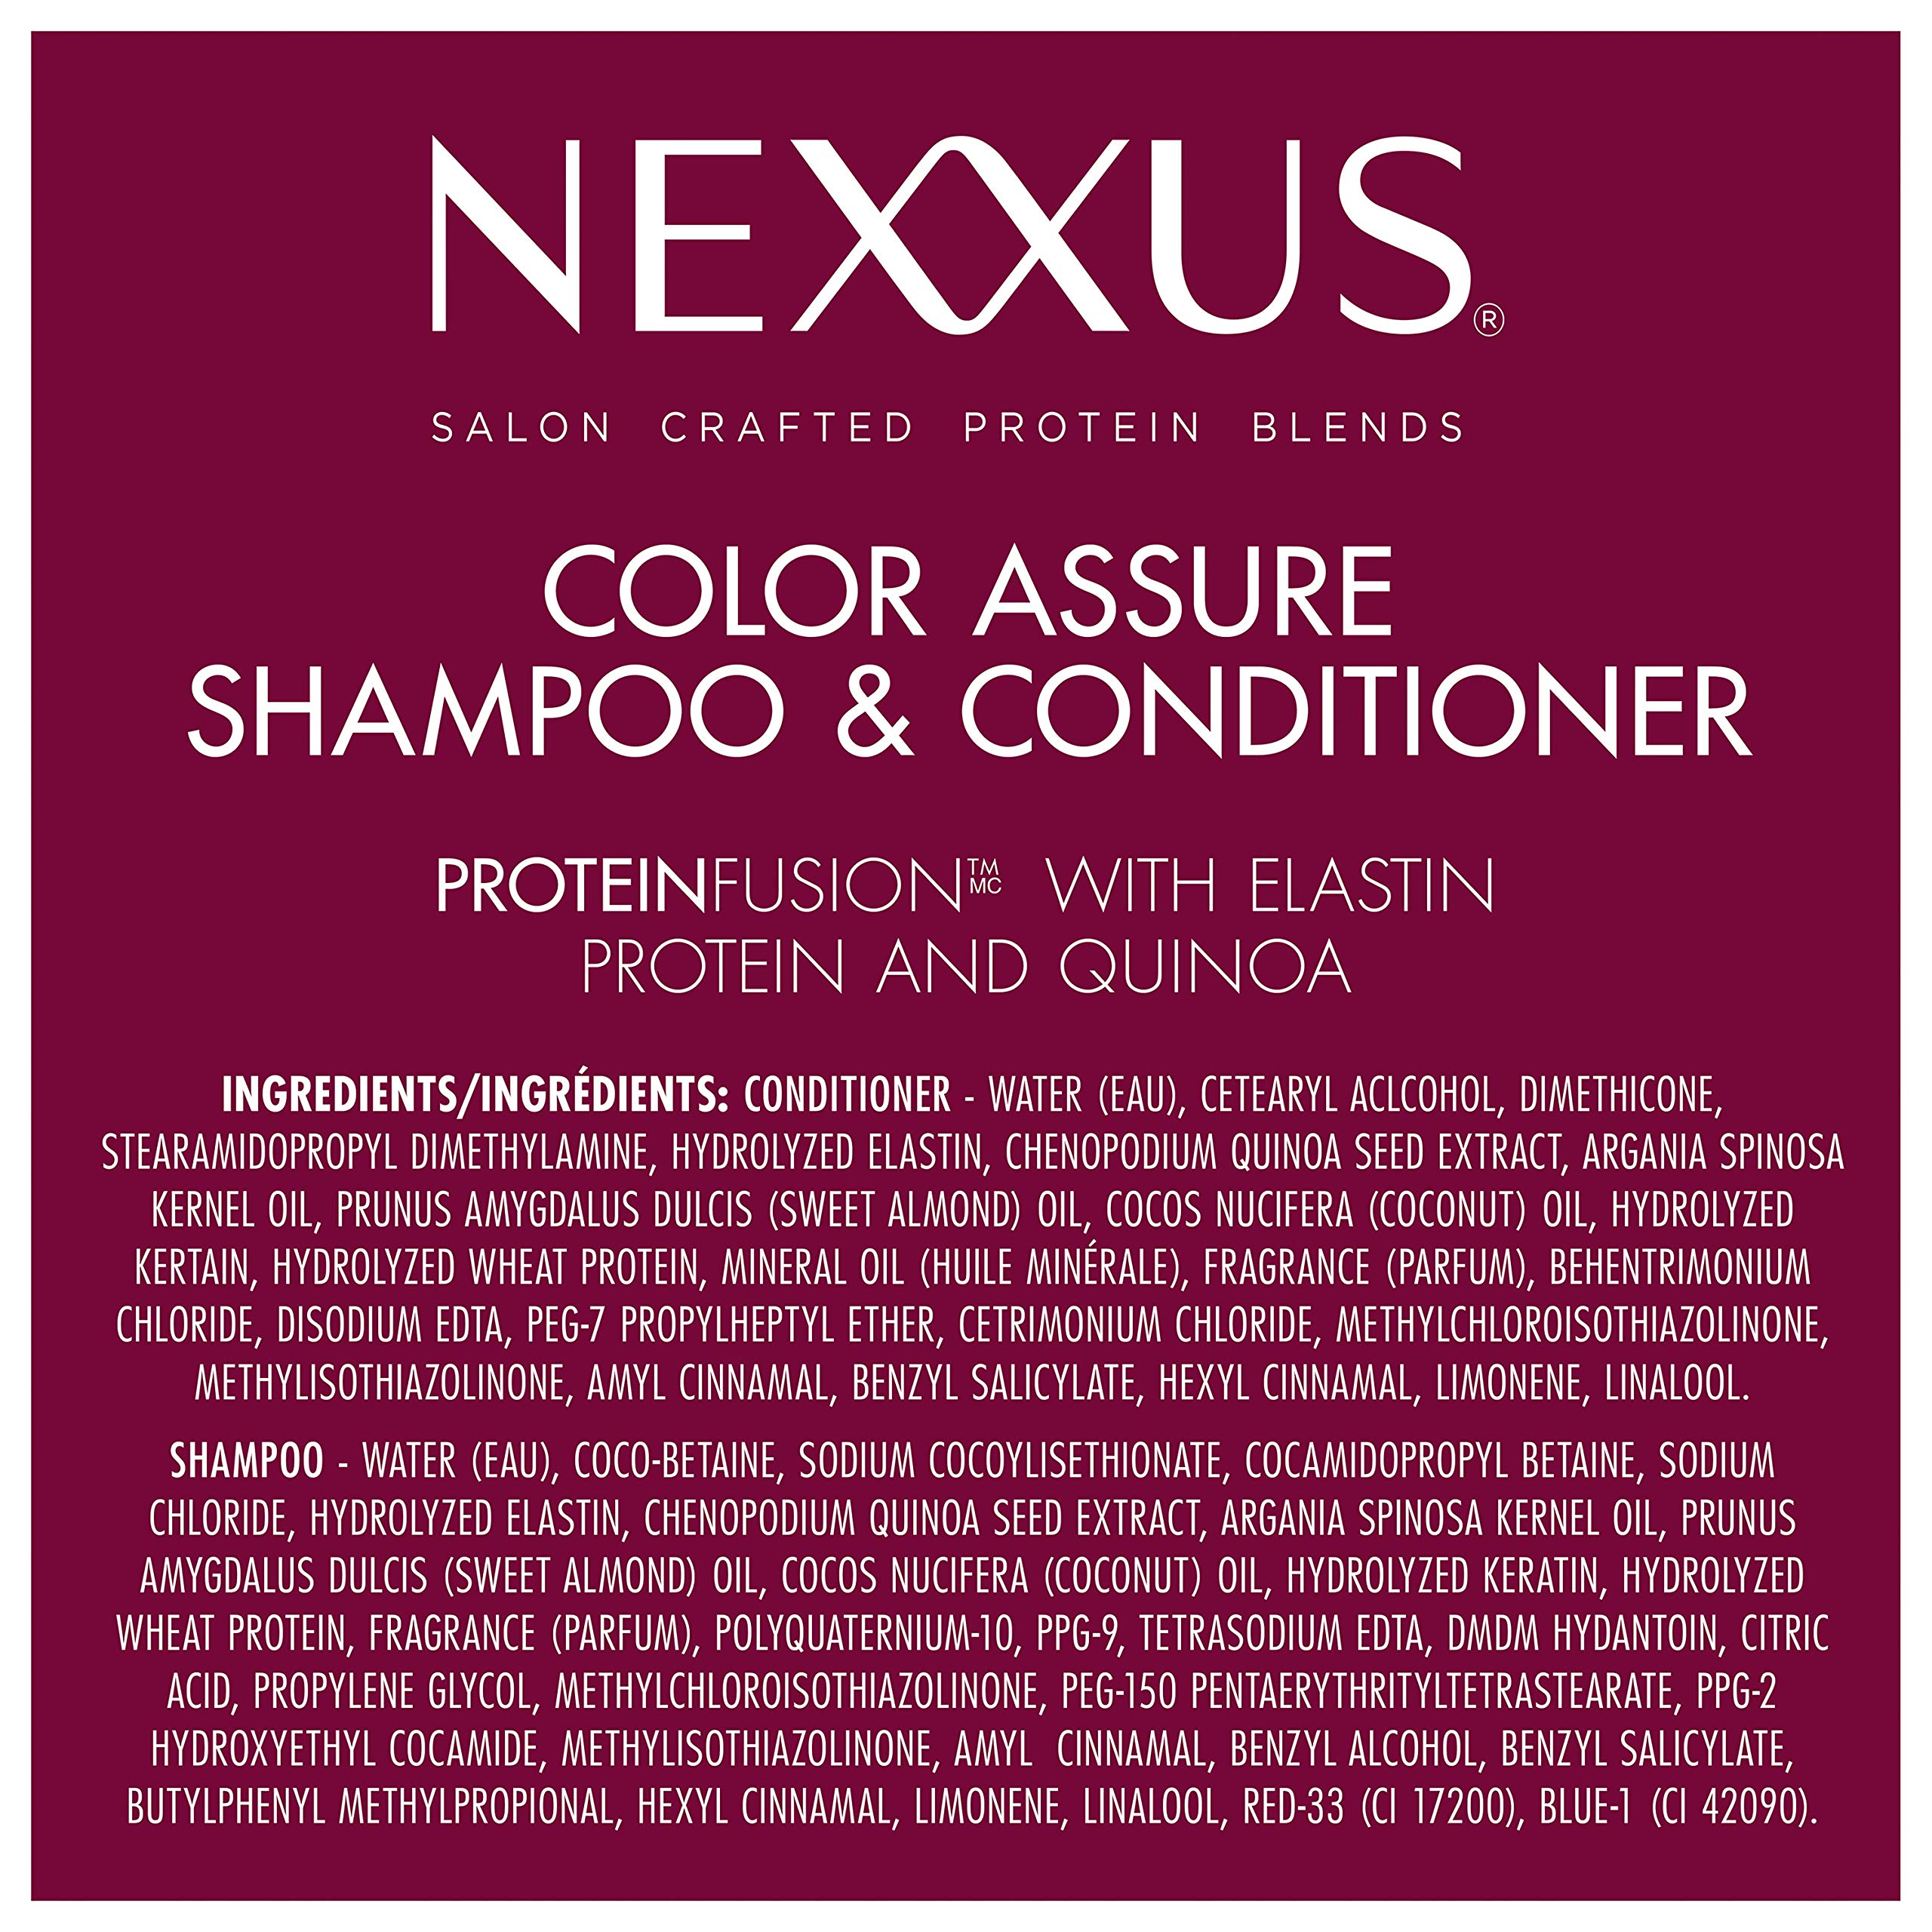 Nexxus Color Assure Shampoo and Conditioner Color Assure 2 Count for Color Treated Hair Enhance Color Vibrancy for Up to 40 Washes 33.8 oz (Pack of 2)